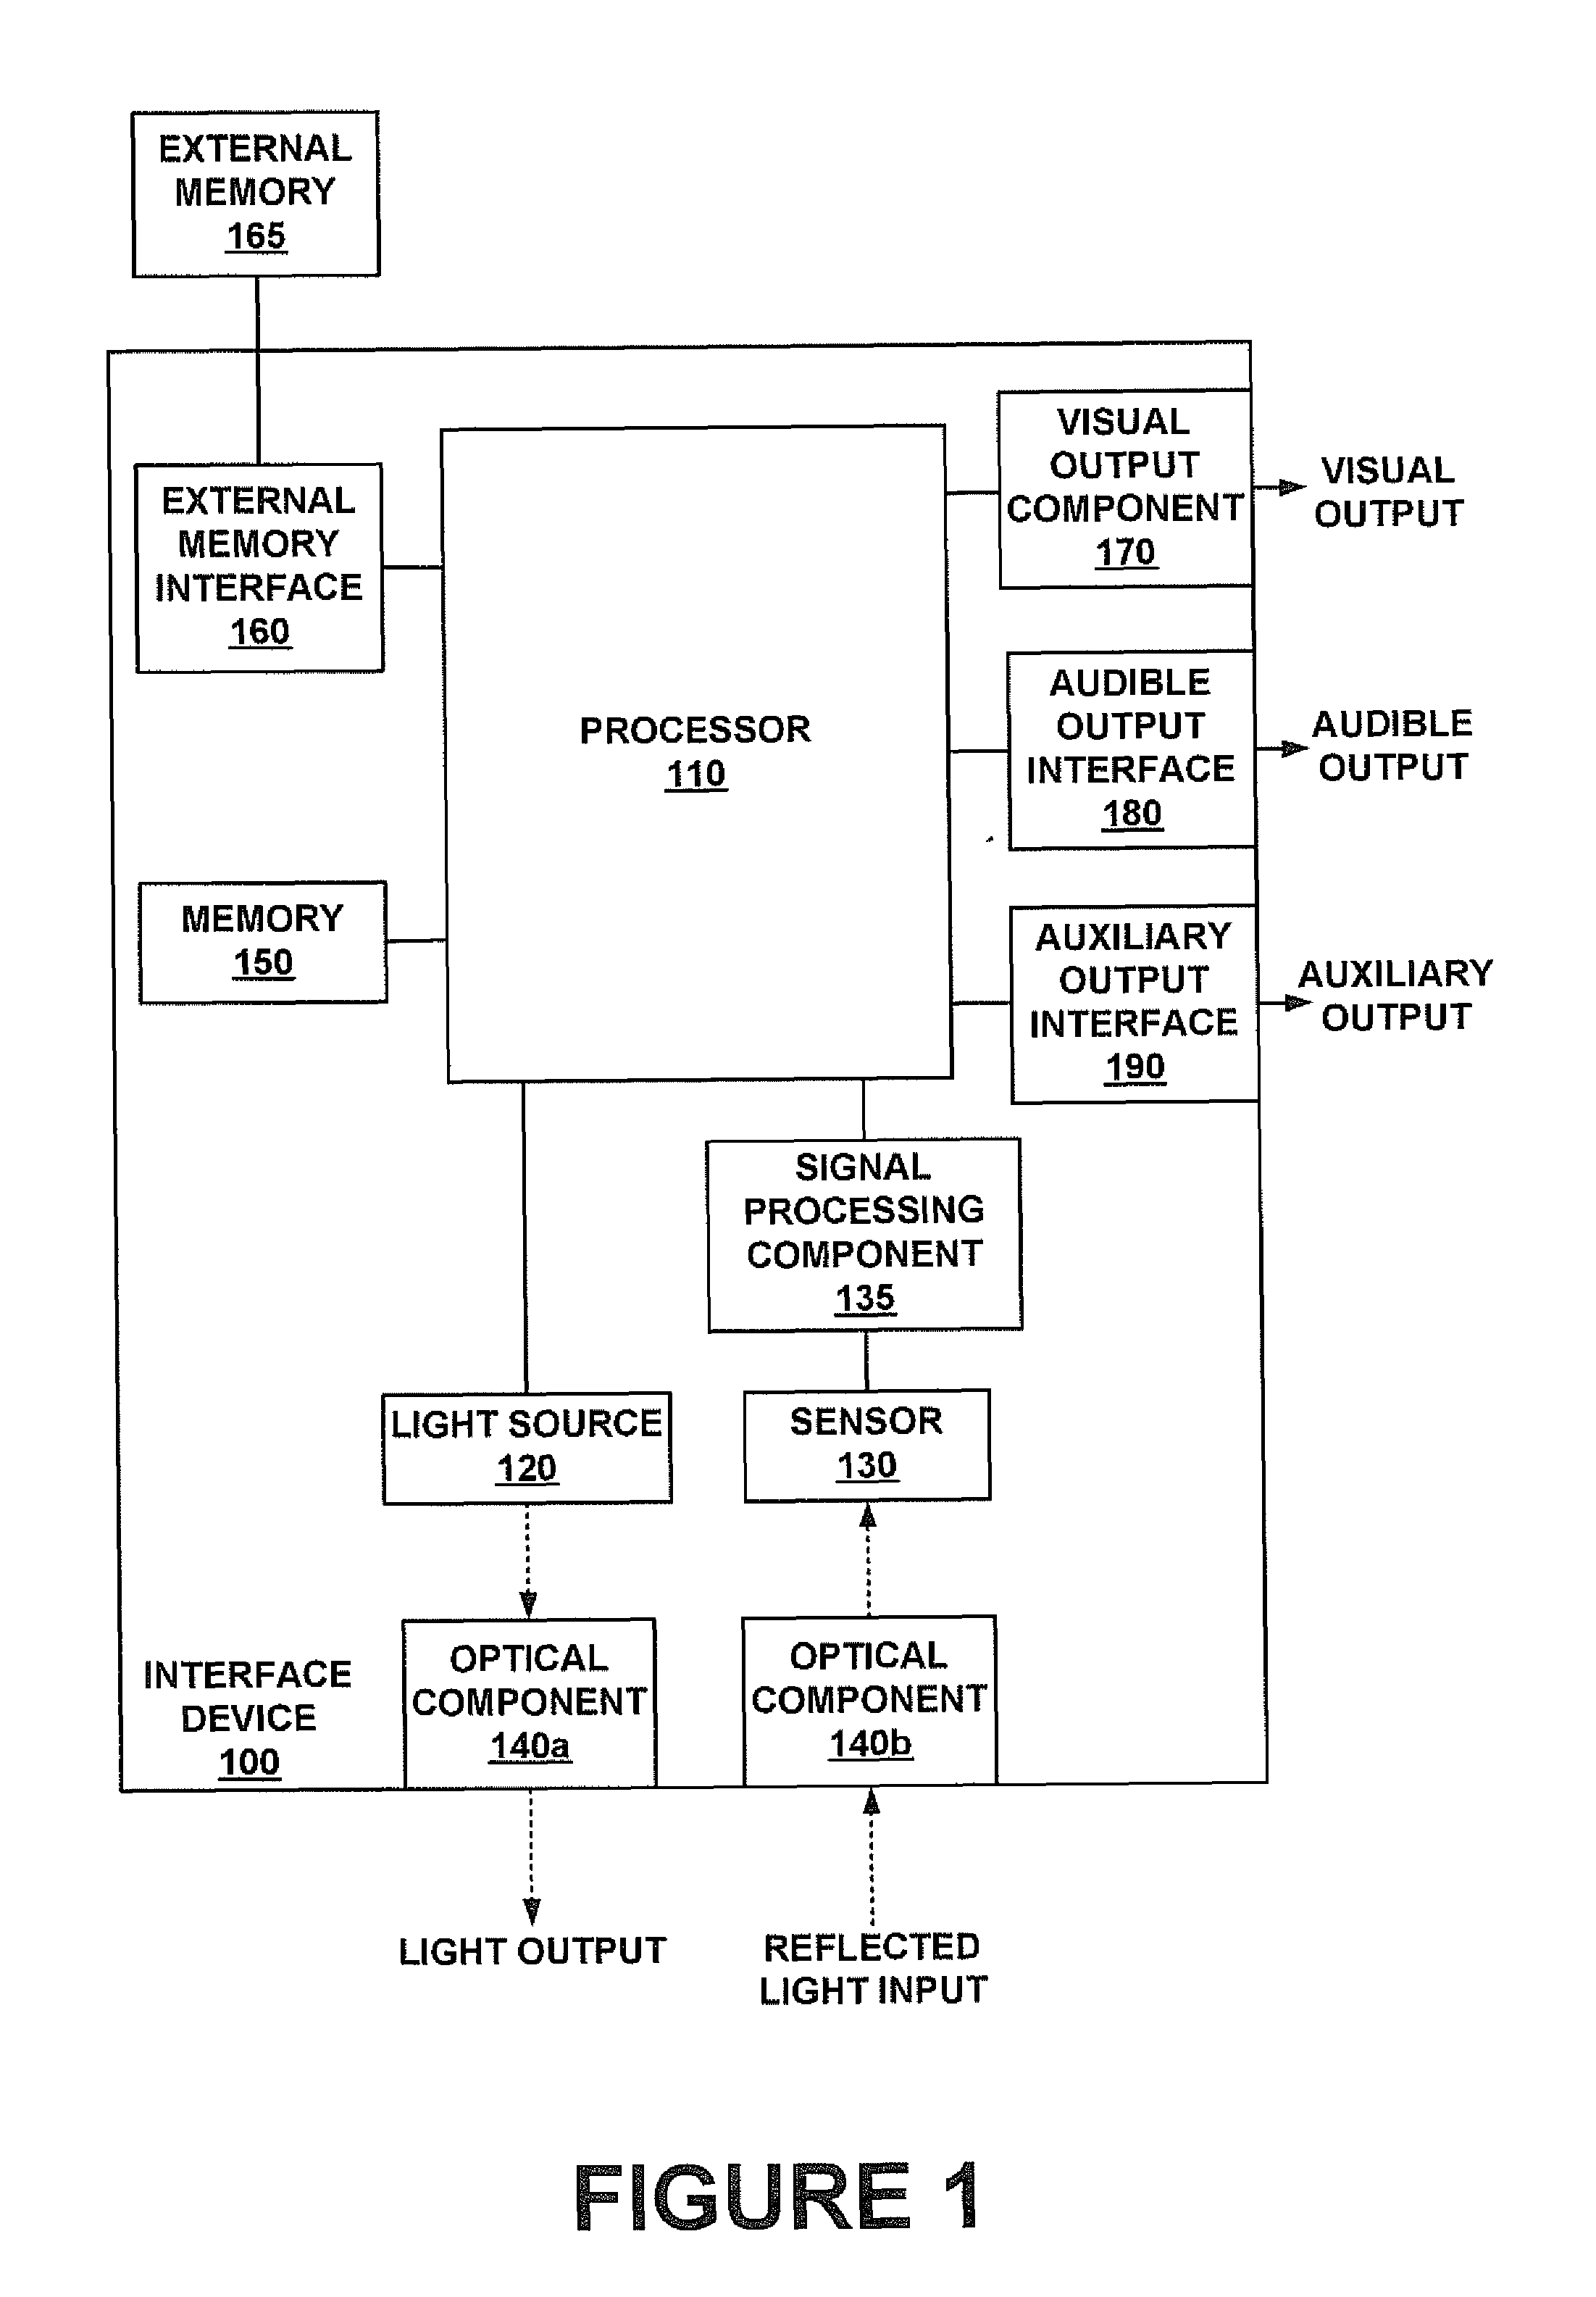 Peripheral interface device for color recognition